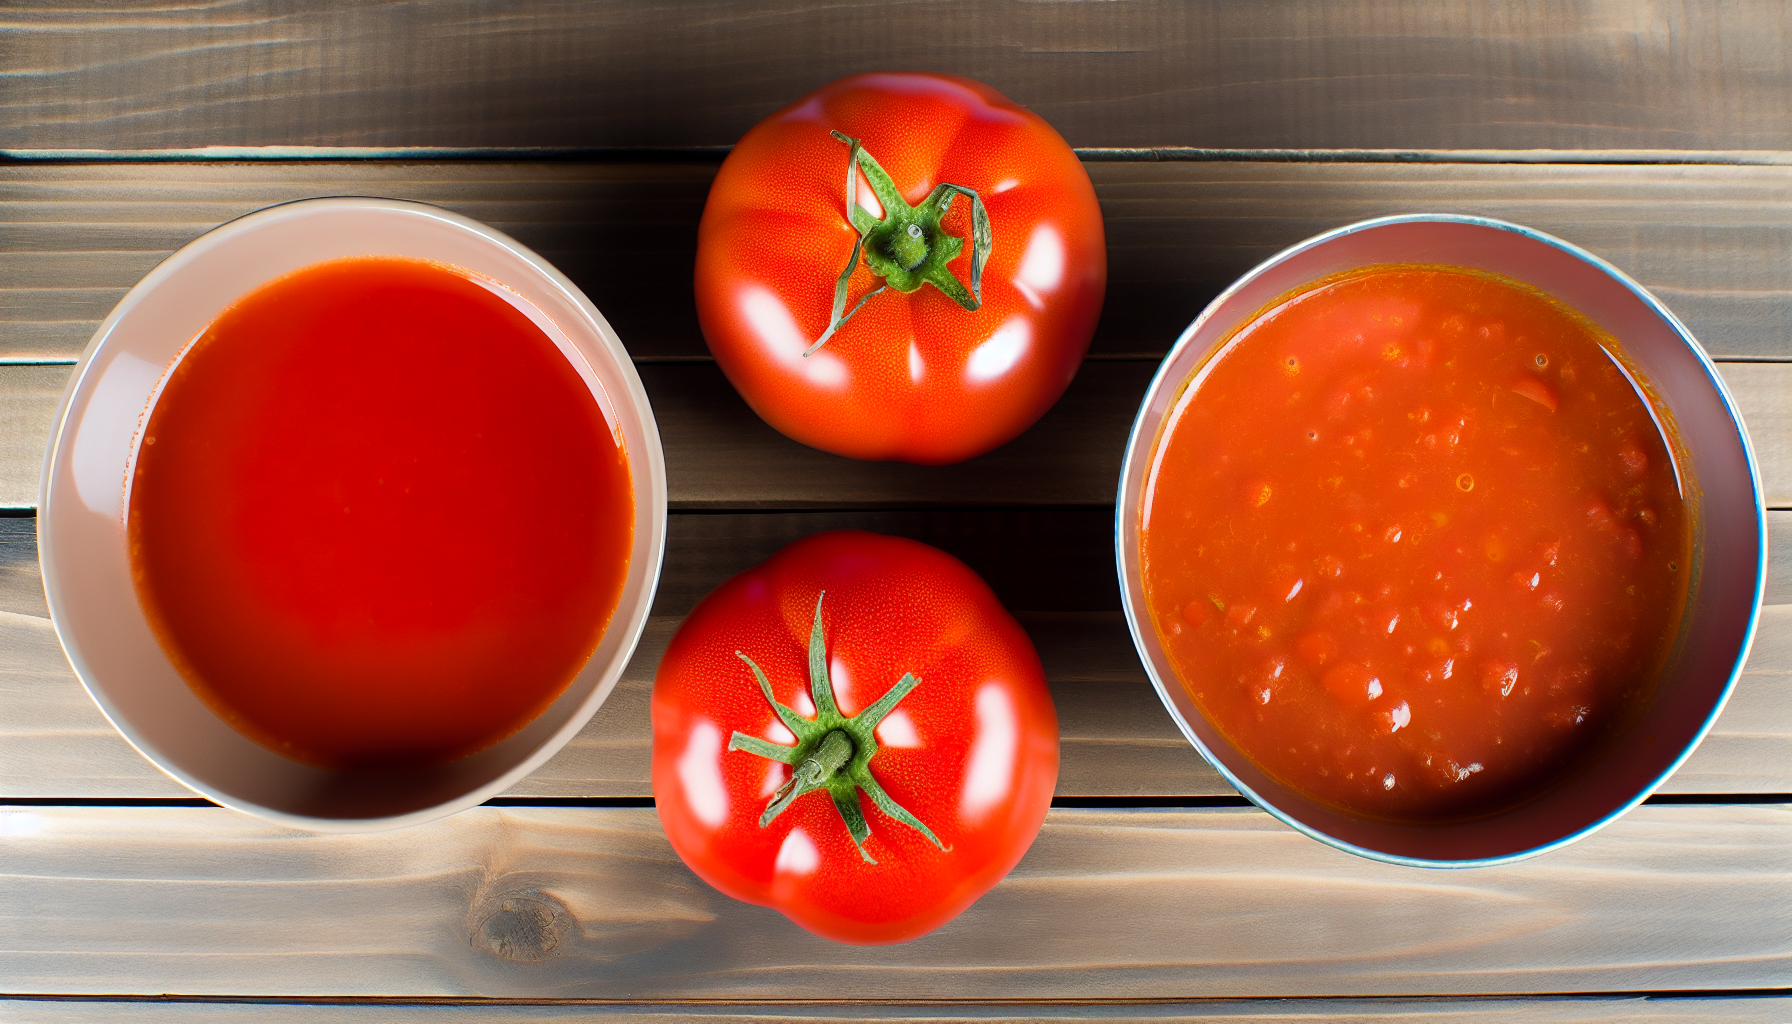 Comparison of fresh and canned tomatoes